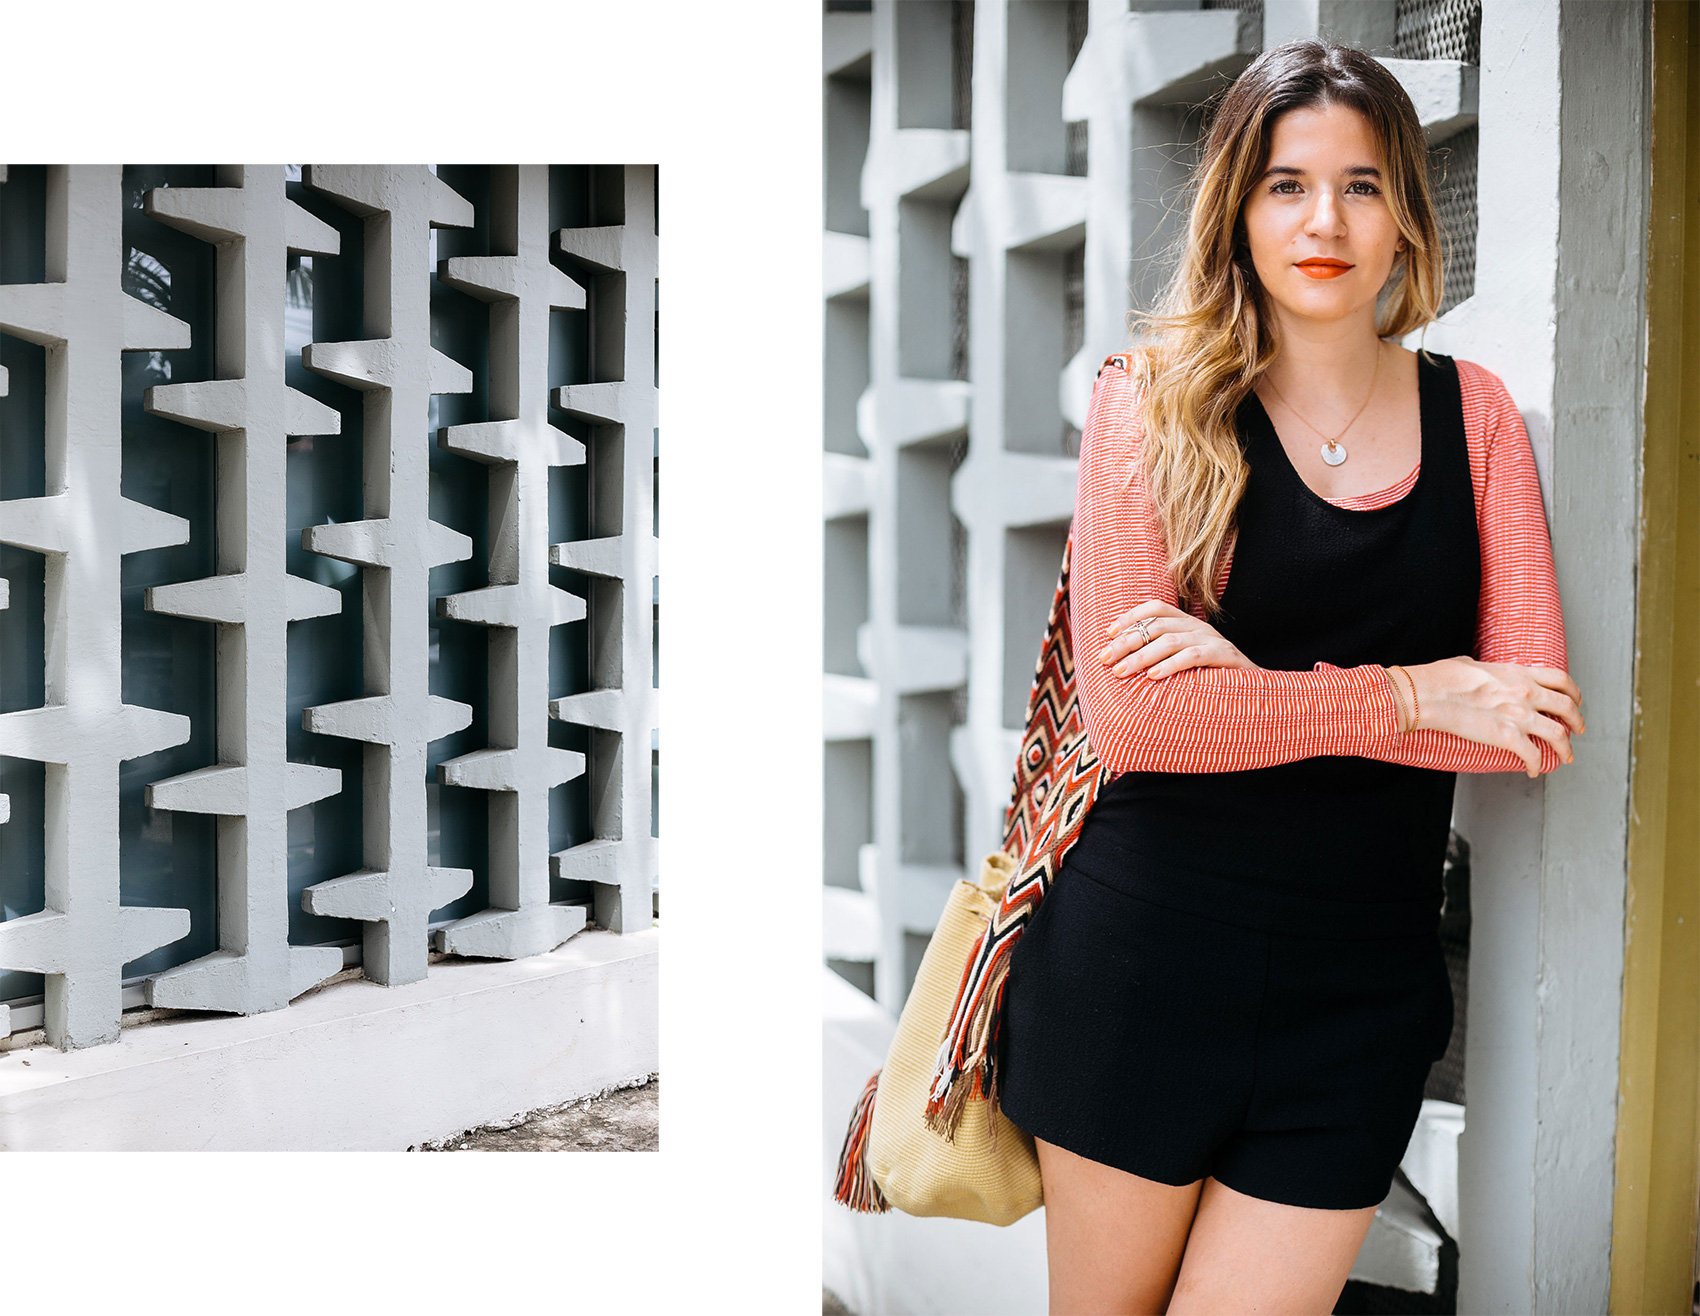 Maristella in front of a midcentury building in Panama City, wearing a black romper over a red long sleeve tee and woven Wayuu bag